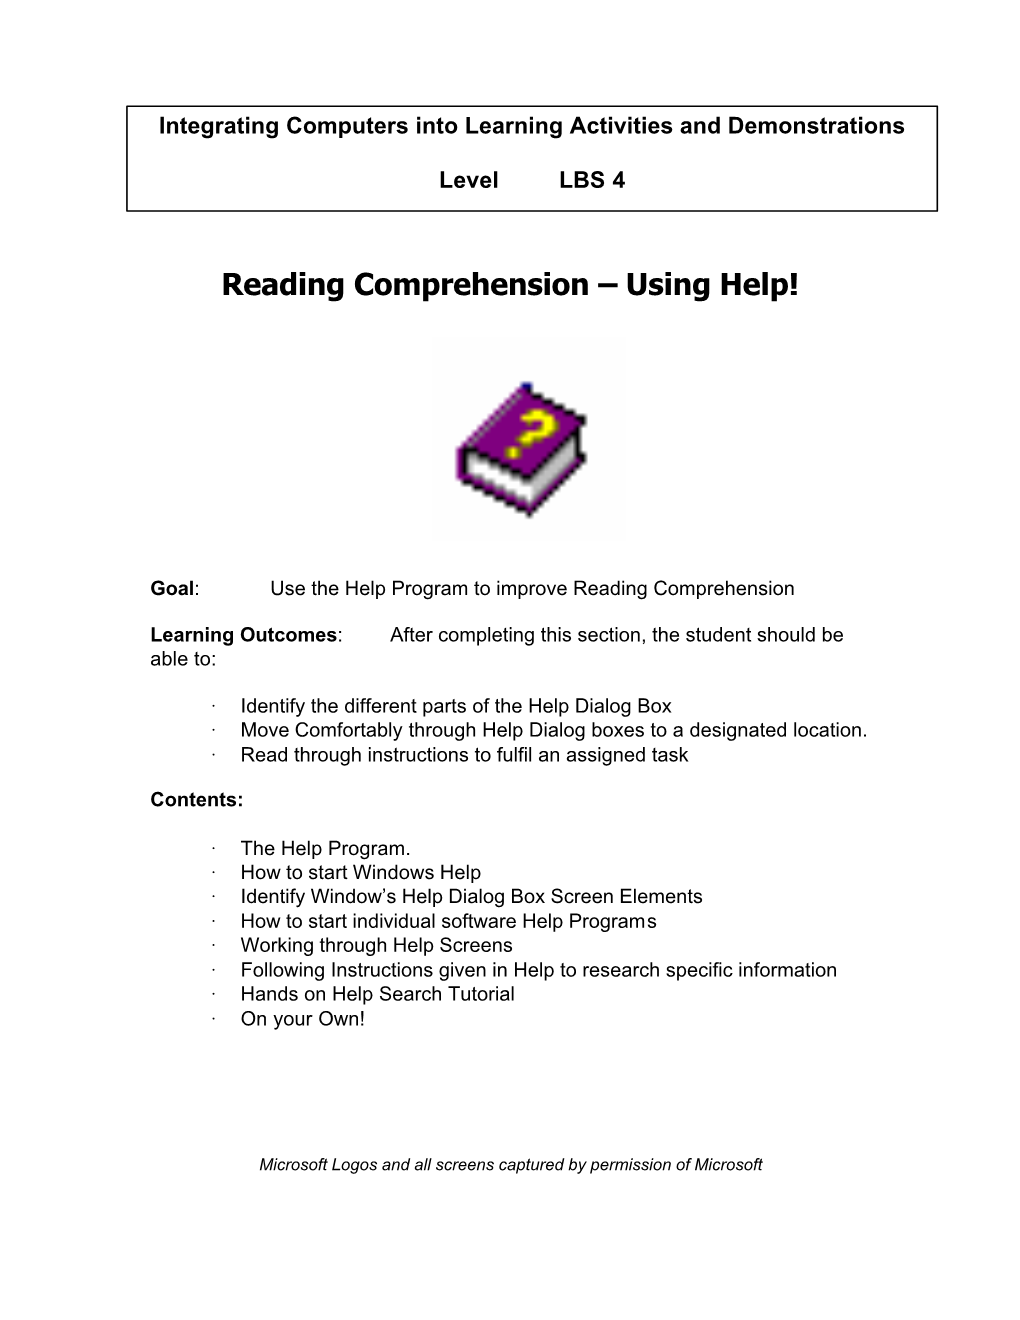 Reading Comprehension Help-LBS4